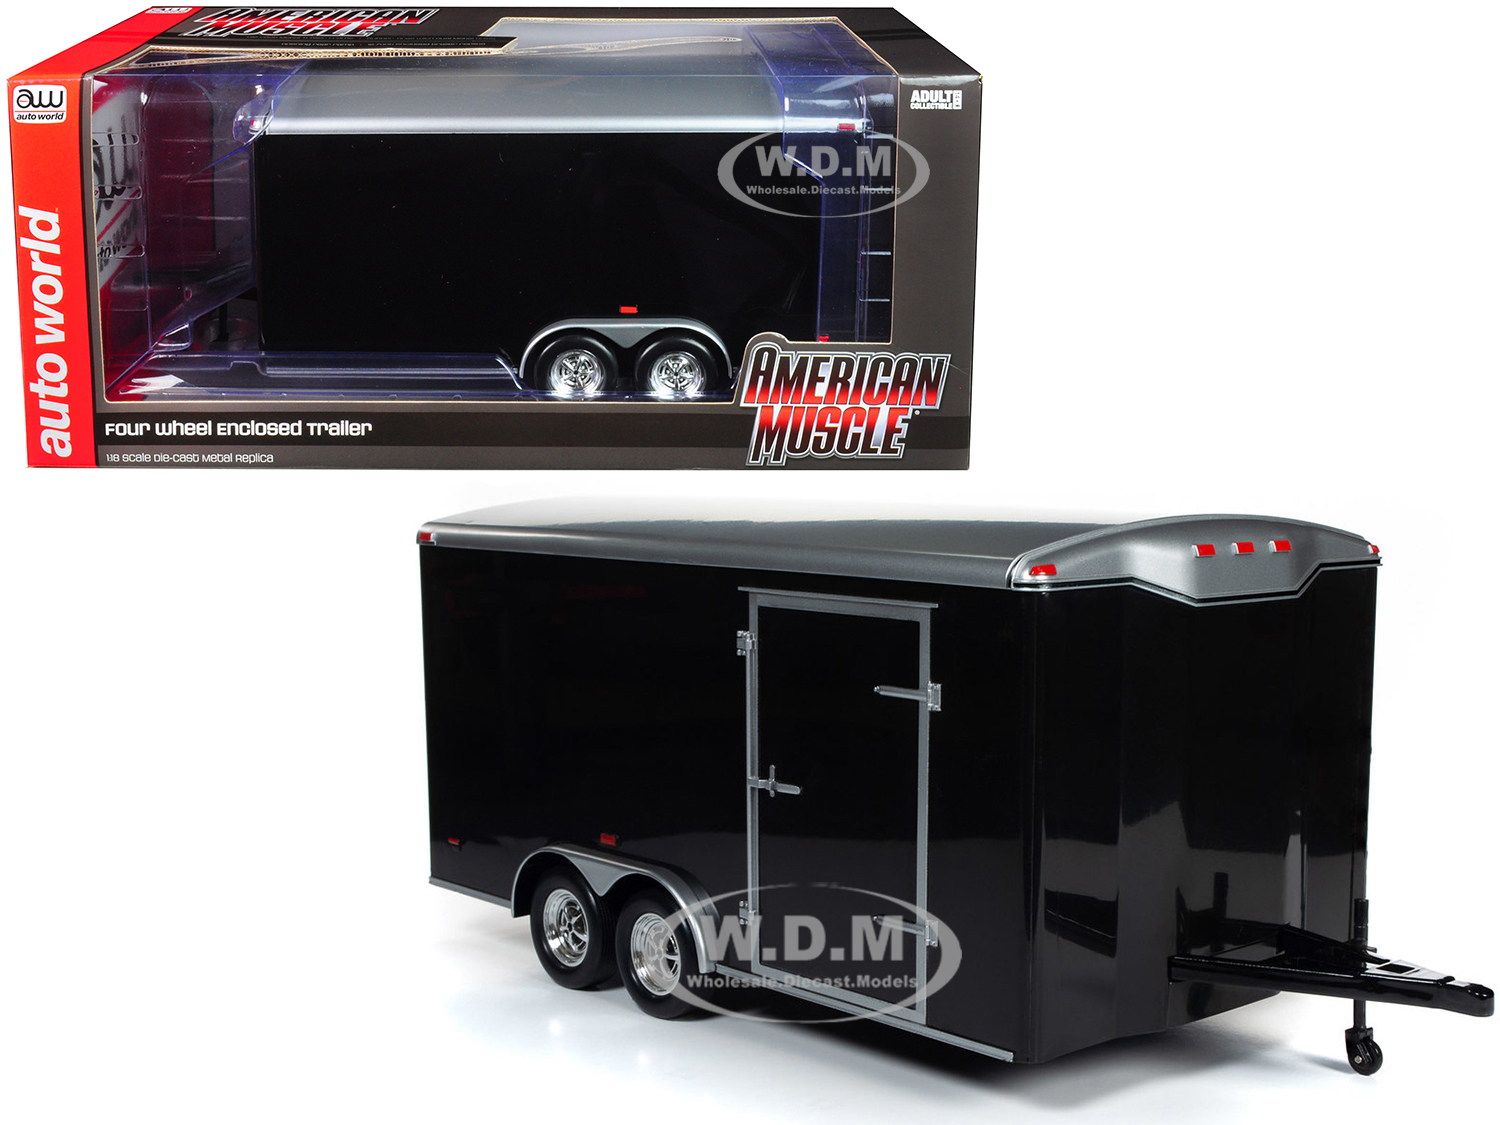 Four Wheel Enclosed Trailer Black With Silver Top For 1/18 Scale Model Cars By Autoworld